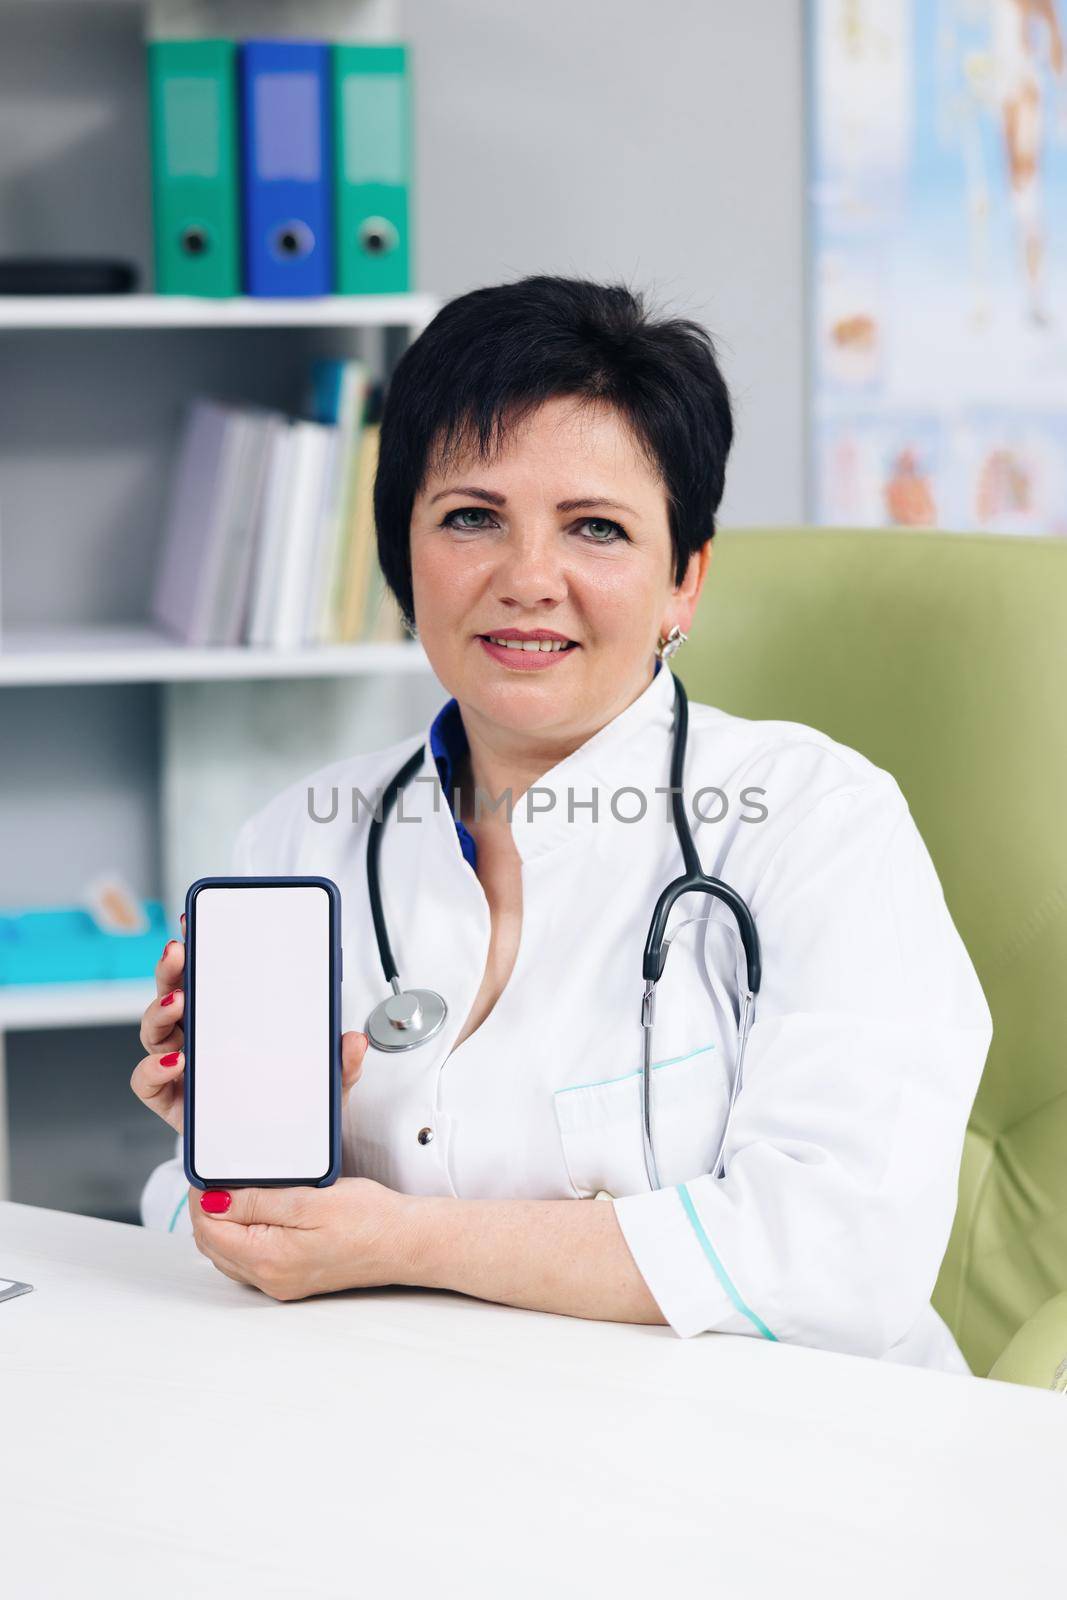 Vertical Photo Medical Doctor Showing Test Results to a Patient on a Smartphone with White Screen in a Health Clinic. Physician is Making Conference Video Call by uflypro